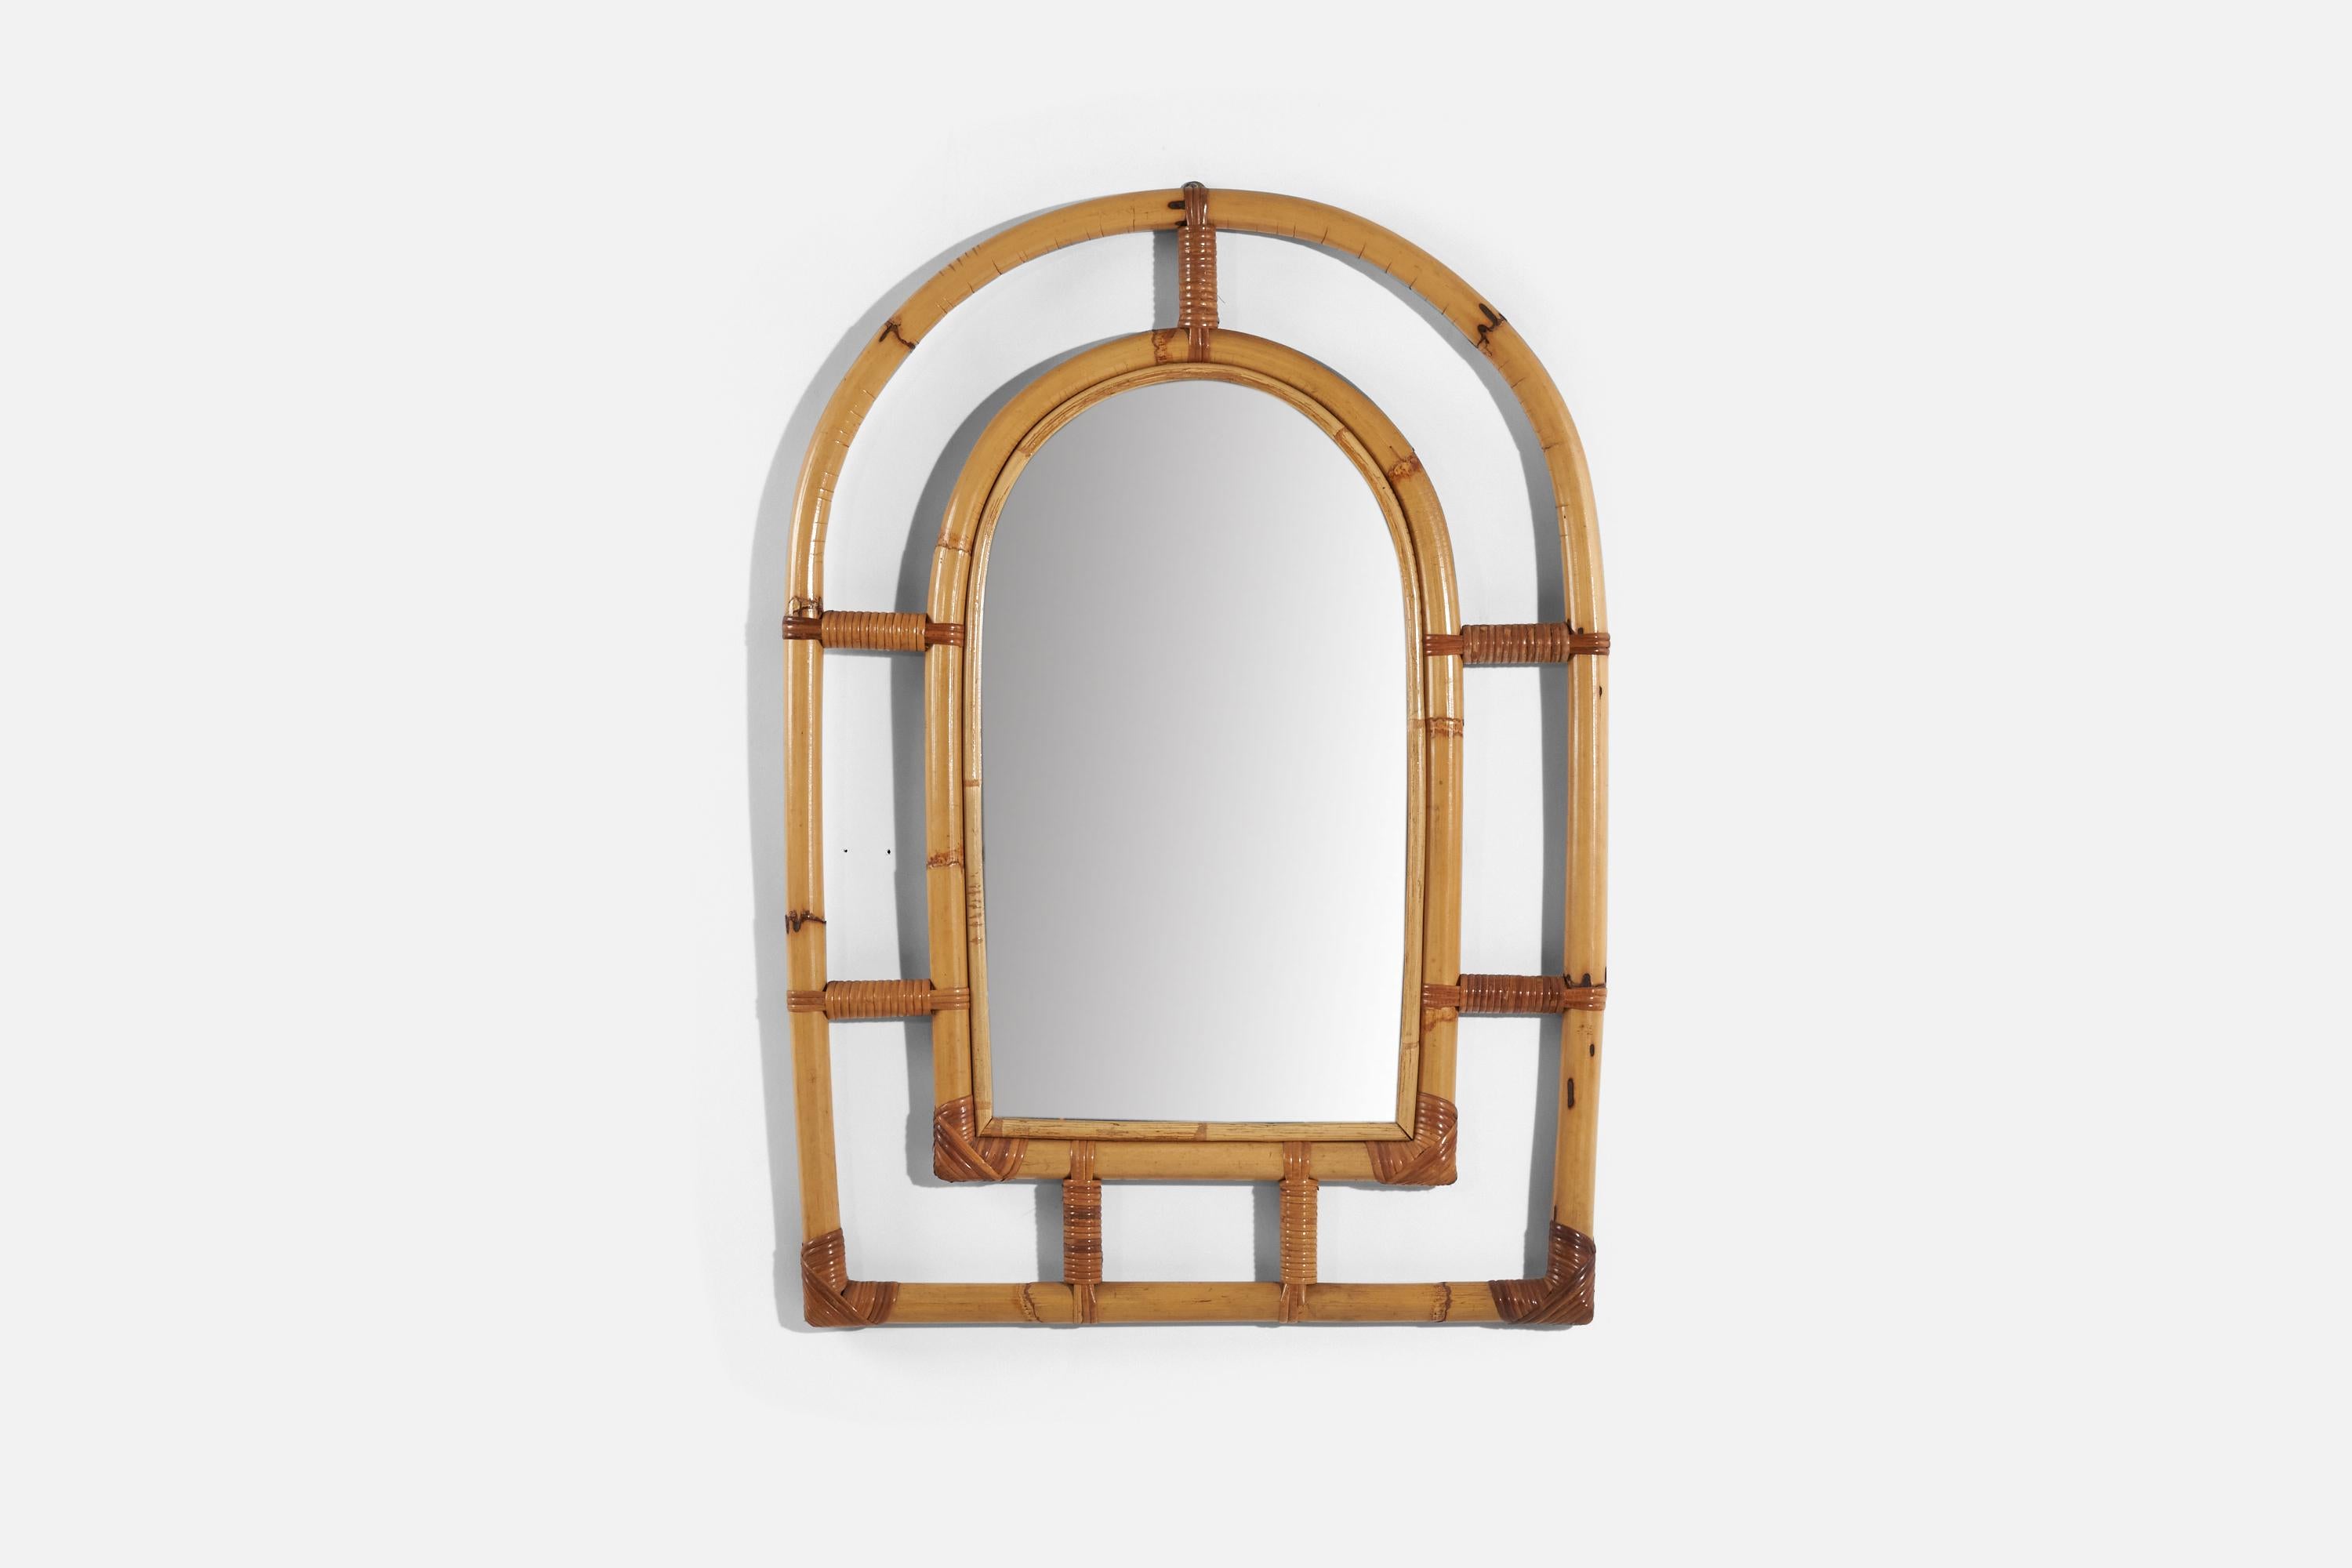 A bamboo and rattan wall mirror designed and produced by an Italian designer, Italy, 1950s-1960s.
   